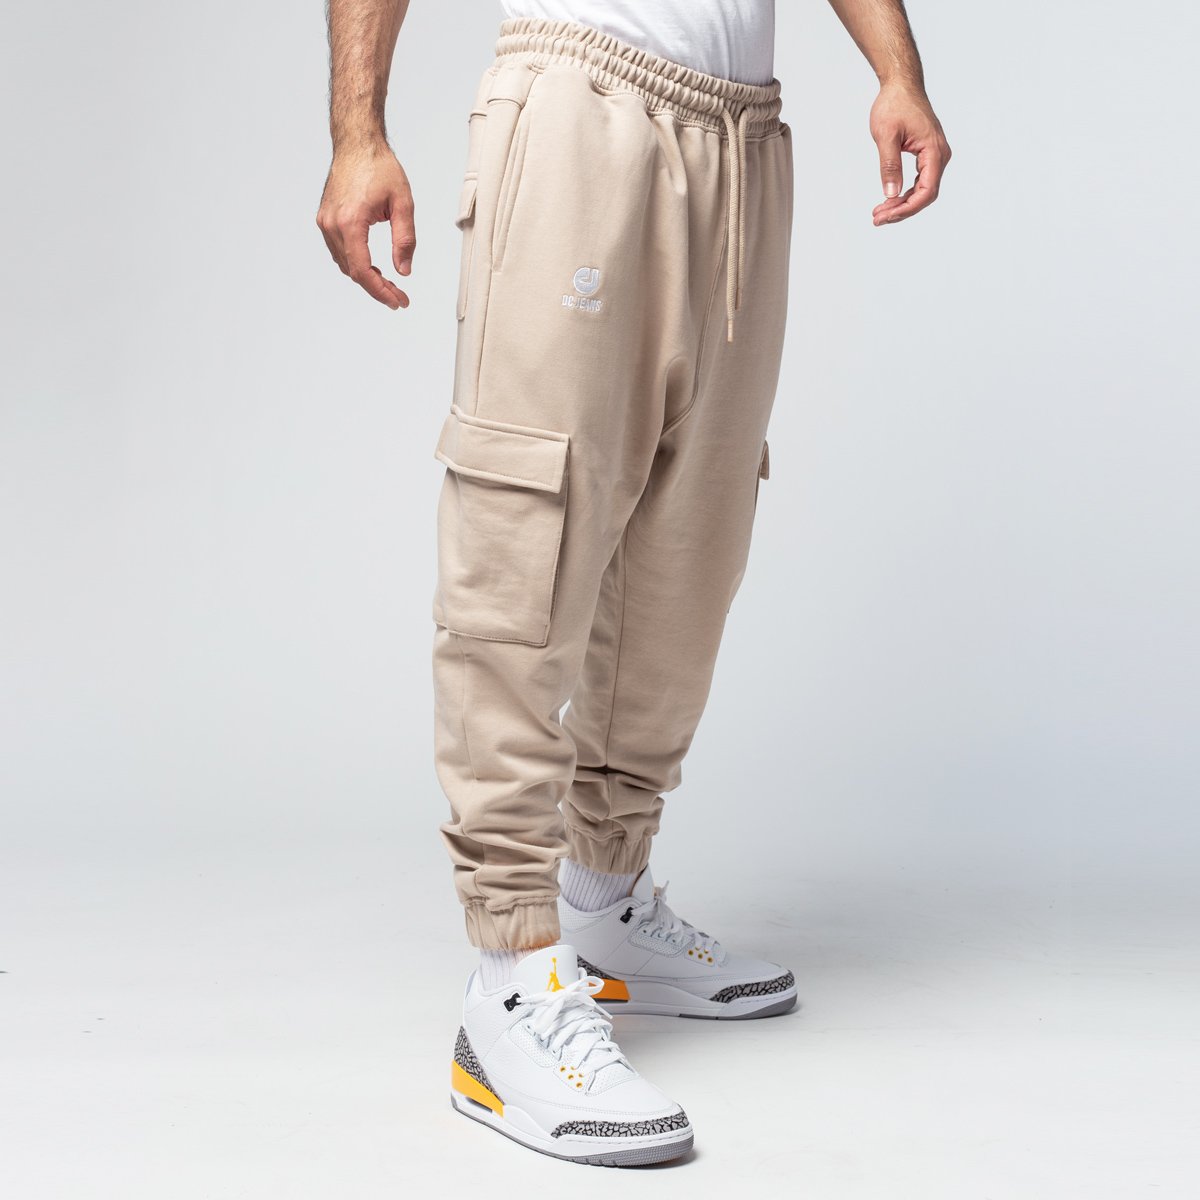 Pocket Jogging Pants Beige - DCjeans saroual and clothing